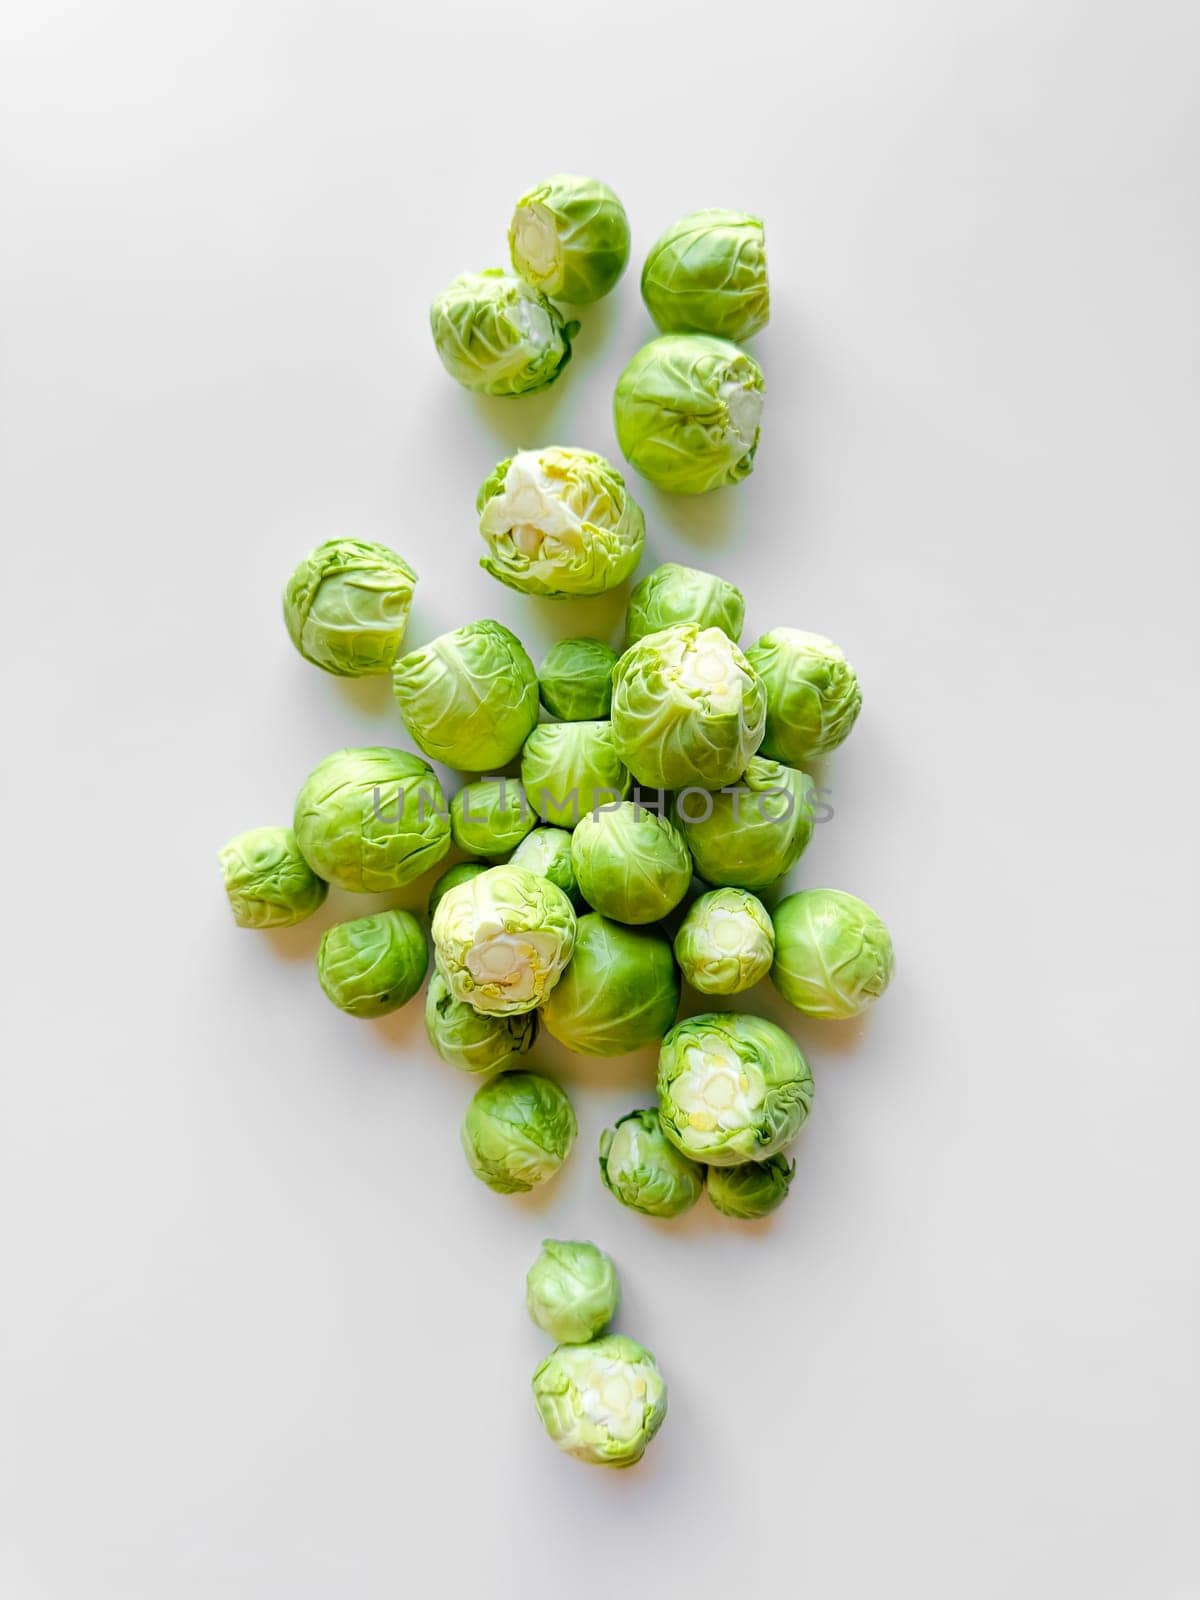 Fresh green Brussels sprouts on white background, healthy eating concept. by Lunnica